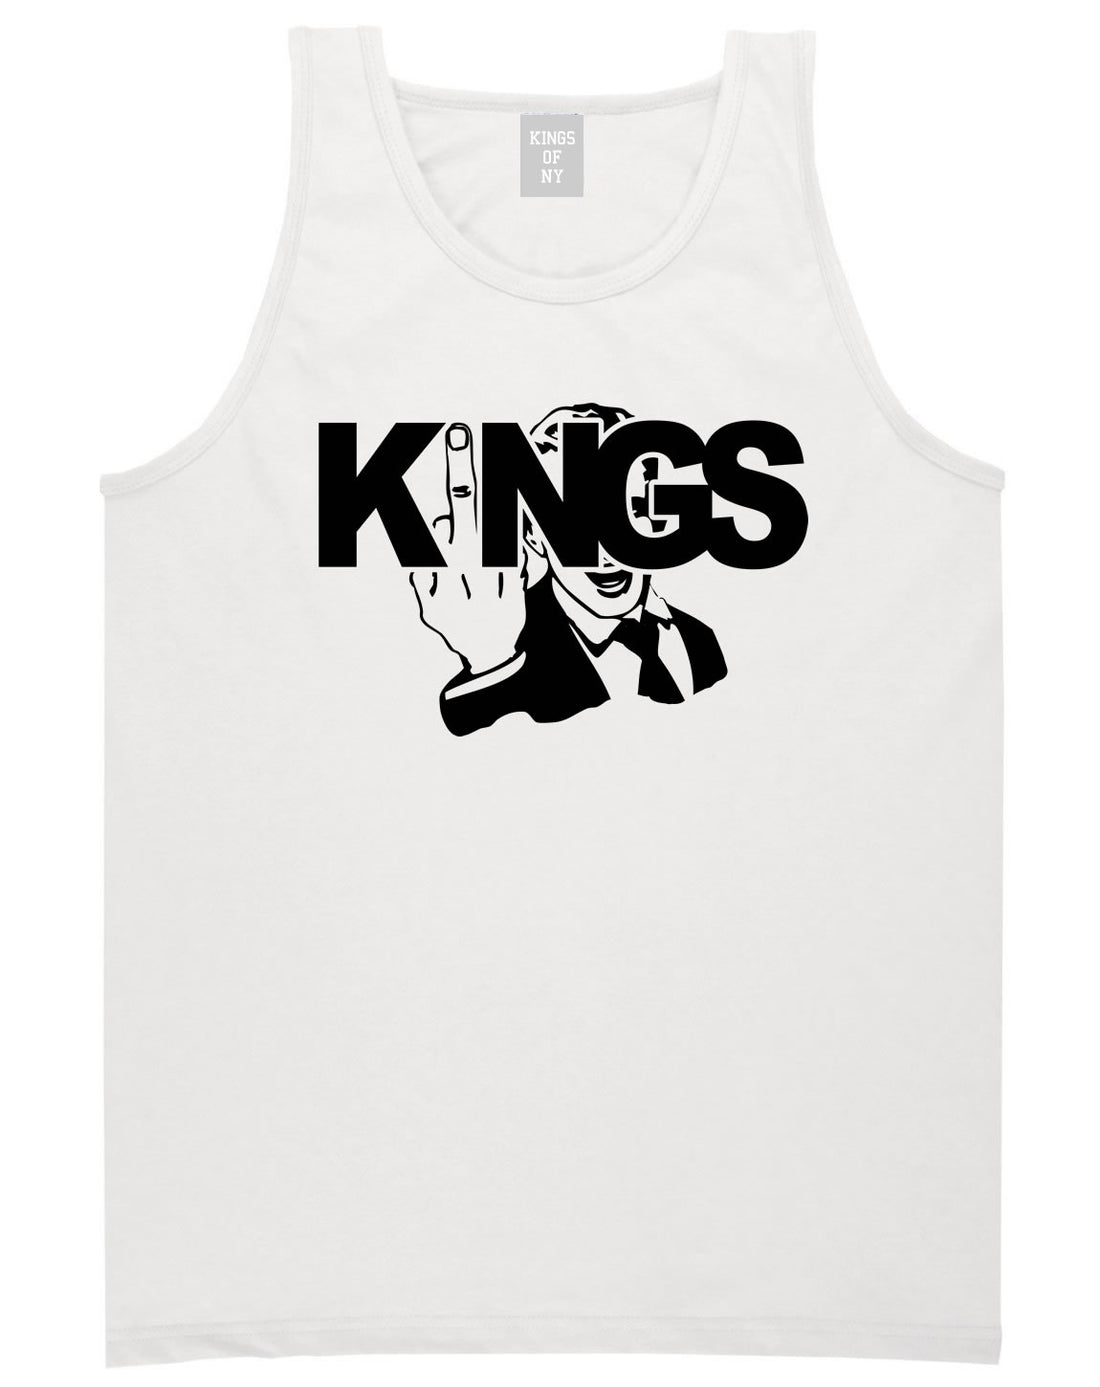 KINGS Middle Finger Tank Top in White